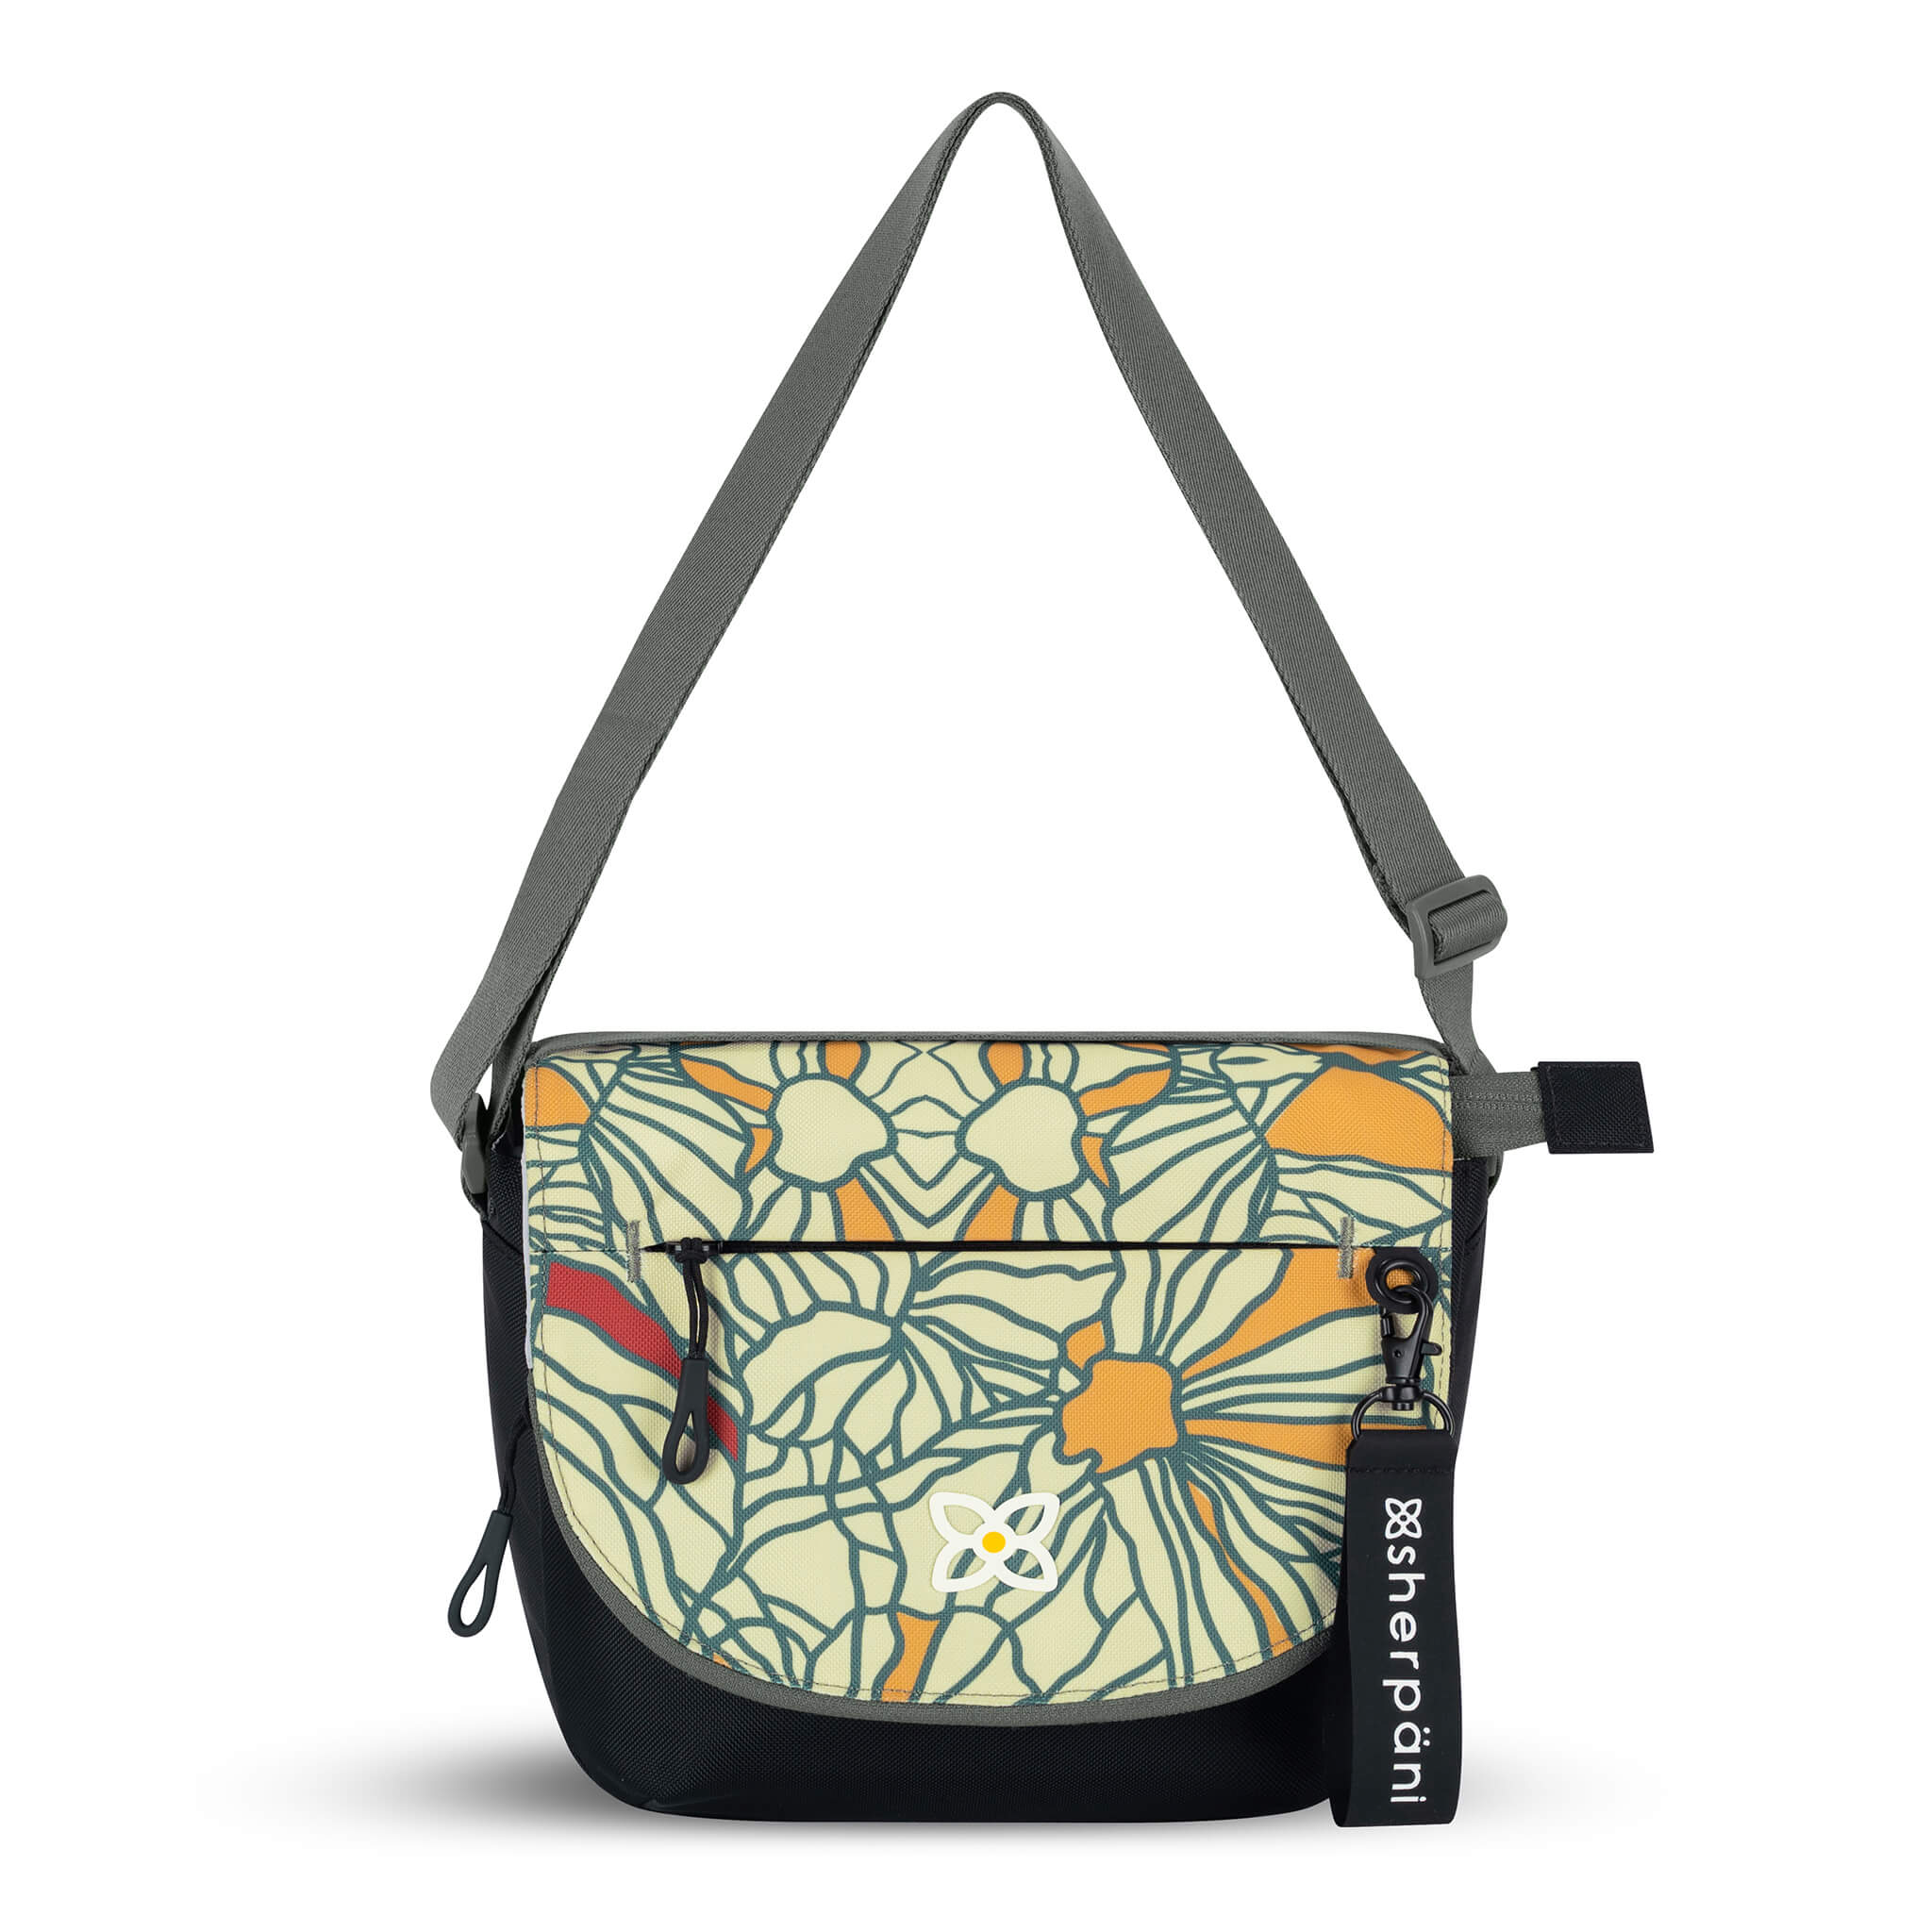 Flat front view of Sherpani messenger satchel bag, the Milli in Fiori. Milli features include an adjustable crossbody strap, front zipper pocket, brimmed zipper pocket, detachable keychain, magnetic closure, RFID security and multiple internal pockets for organization. The Fiori colorway is two-toned in black and a floral pattern with red accents.